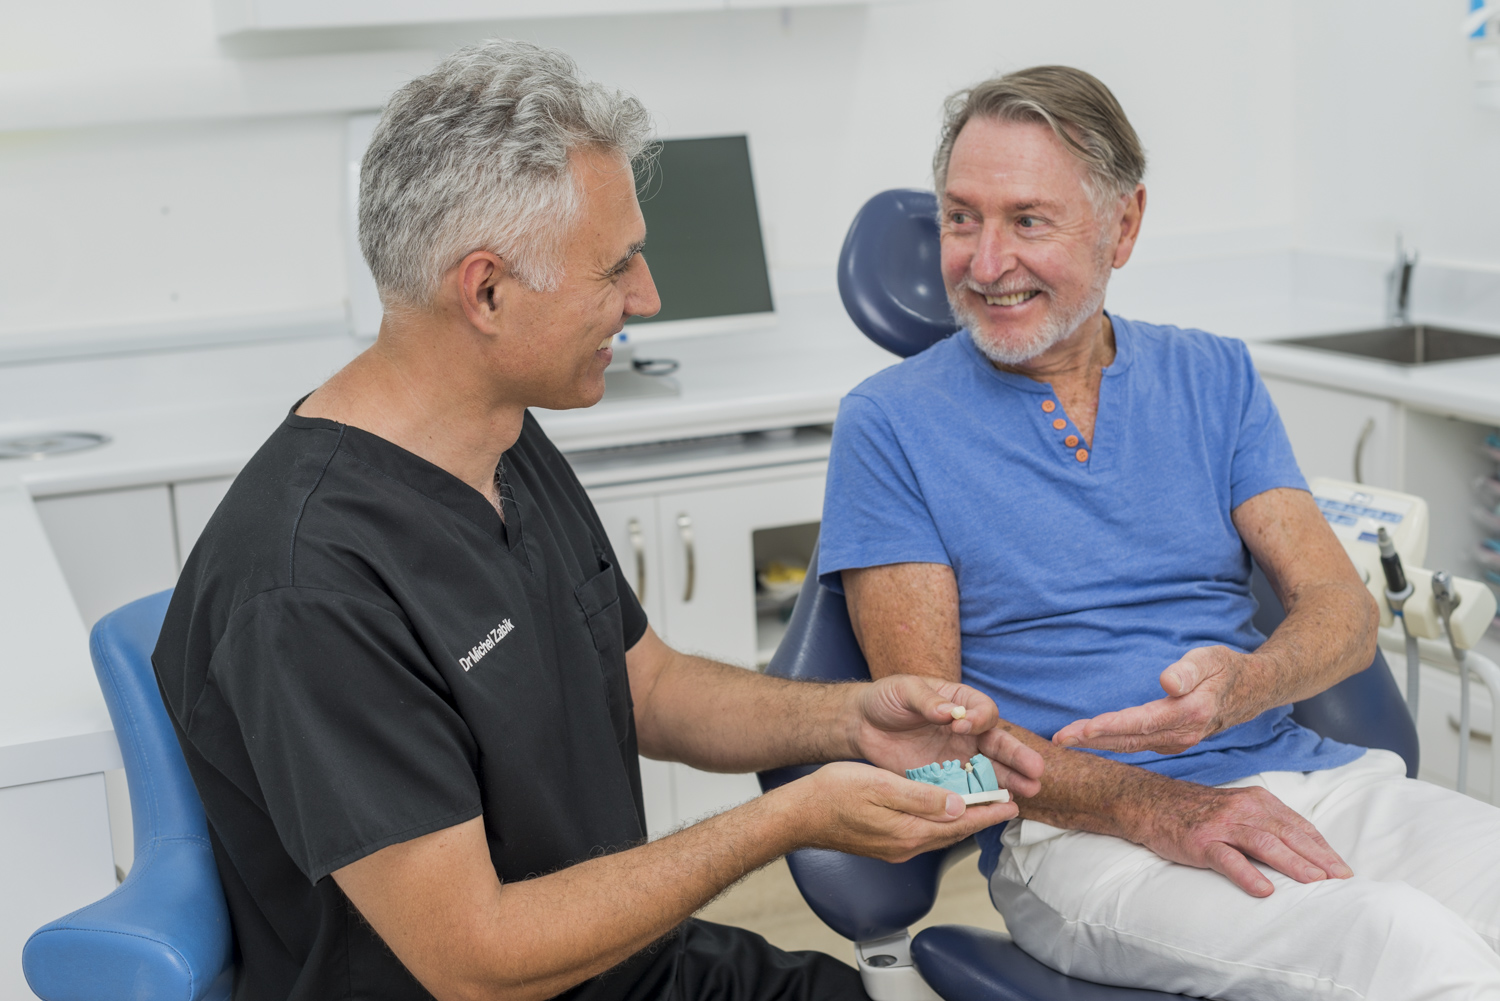 Woombye Dental, we take tremendous care when designing restorative implants to ensure you get the very best results